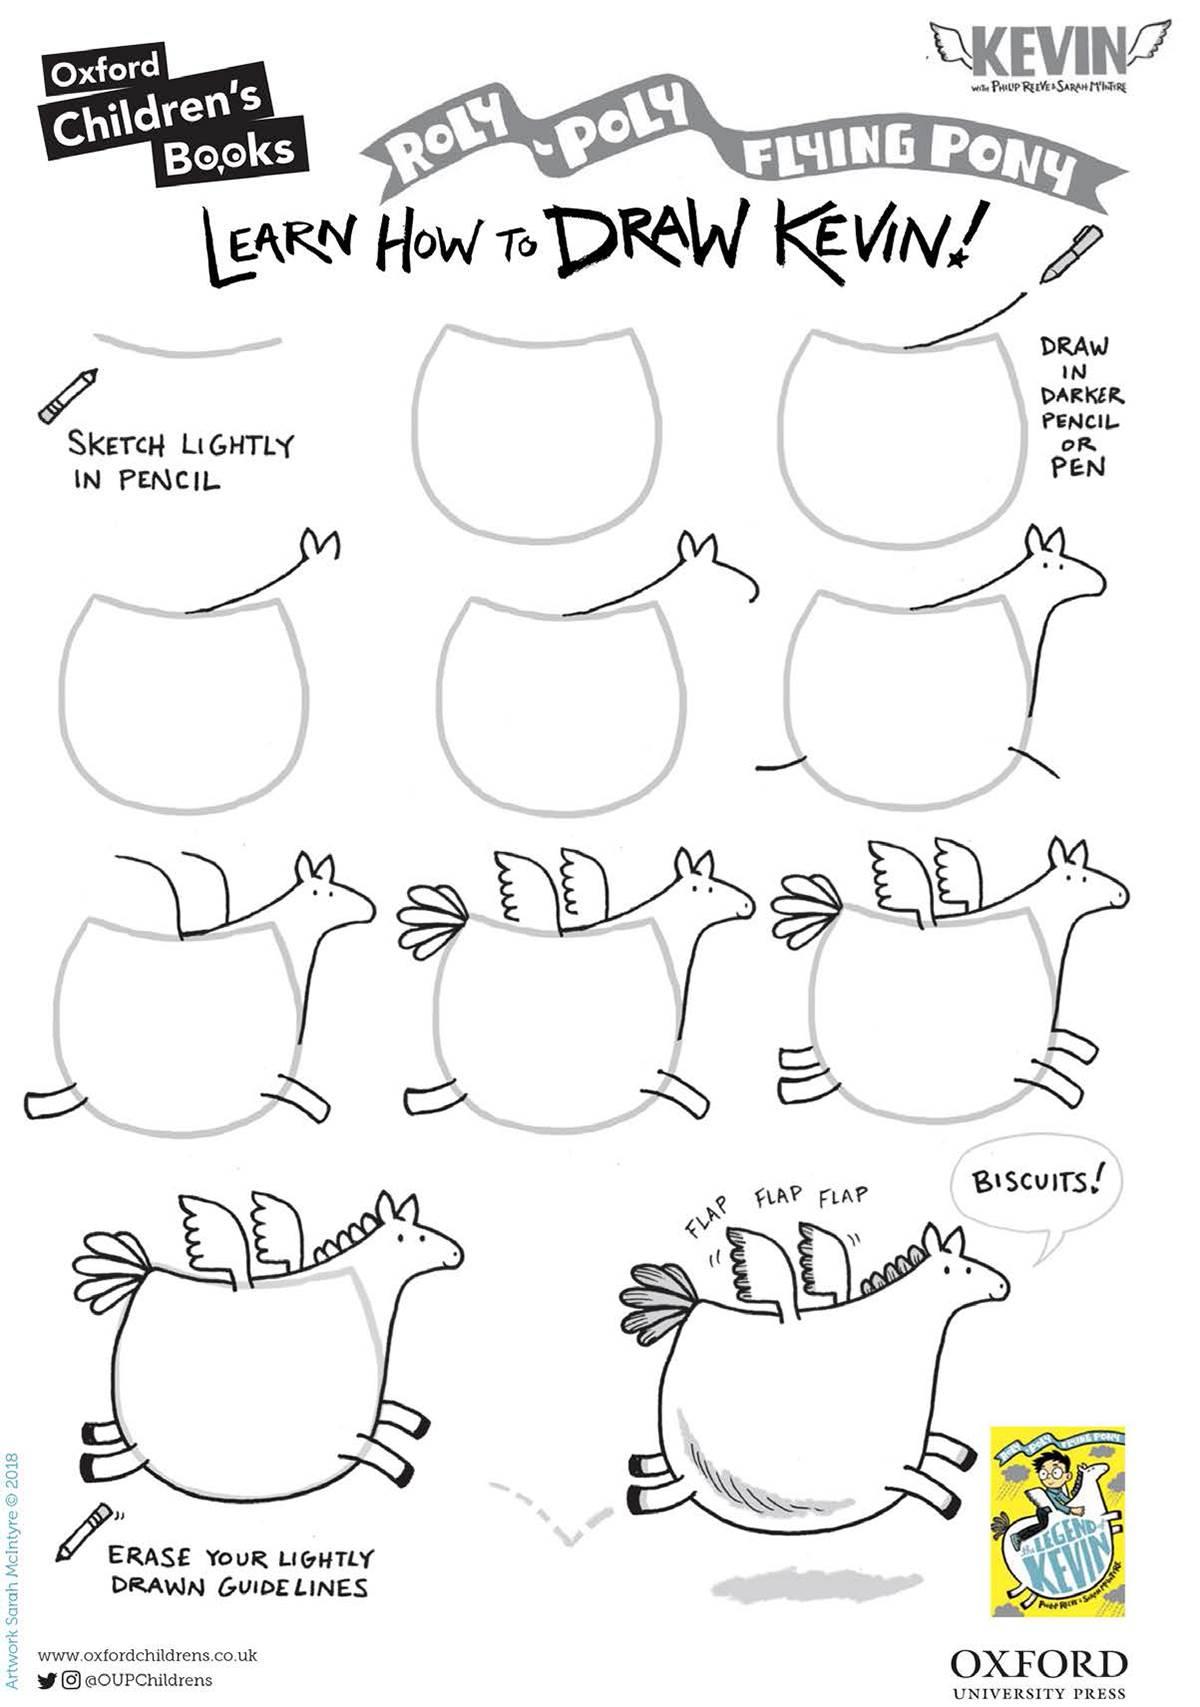 Instructions for how to draw Kevin by Sarah McIntyre